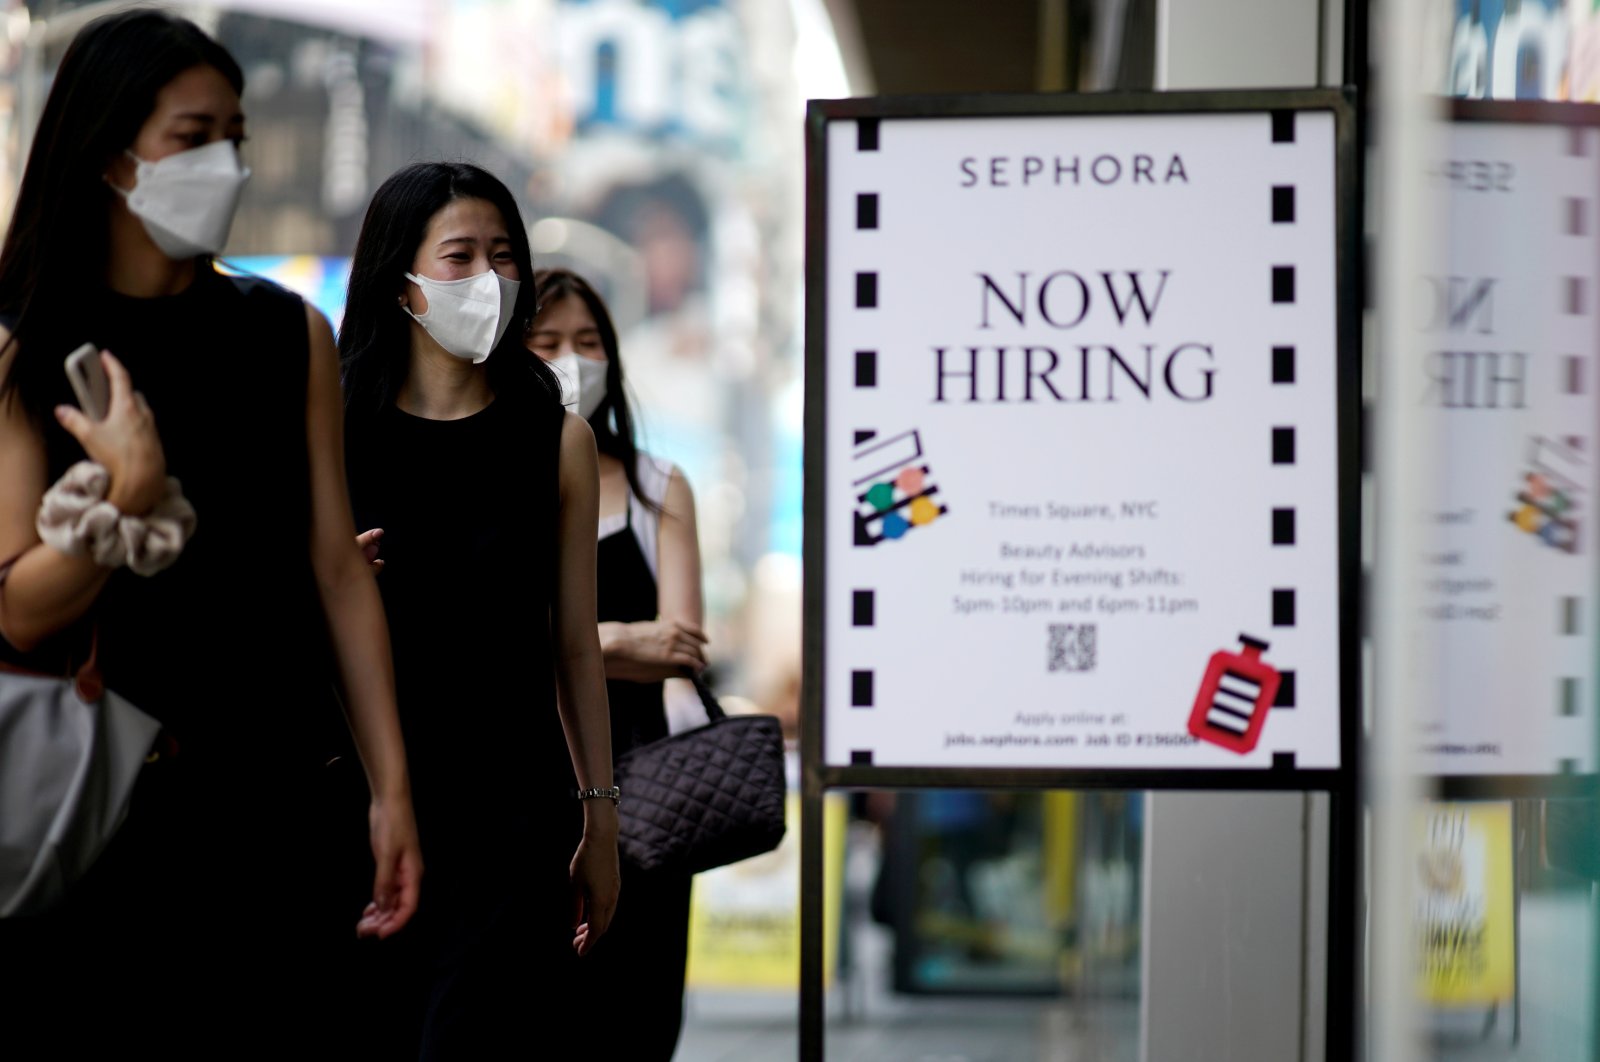 A sign advertising job openings is seen while people walk into a store in New York City, New York, U.S., Aug. 6, 2021. (Reuters Photo)